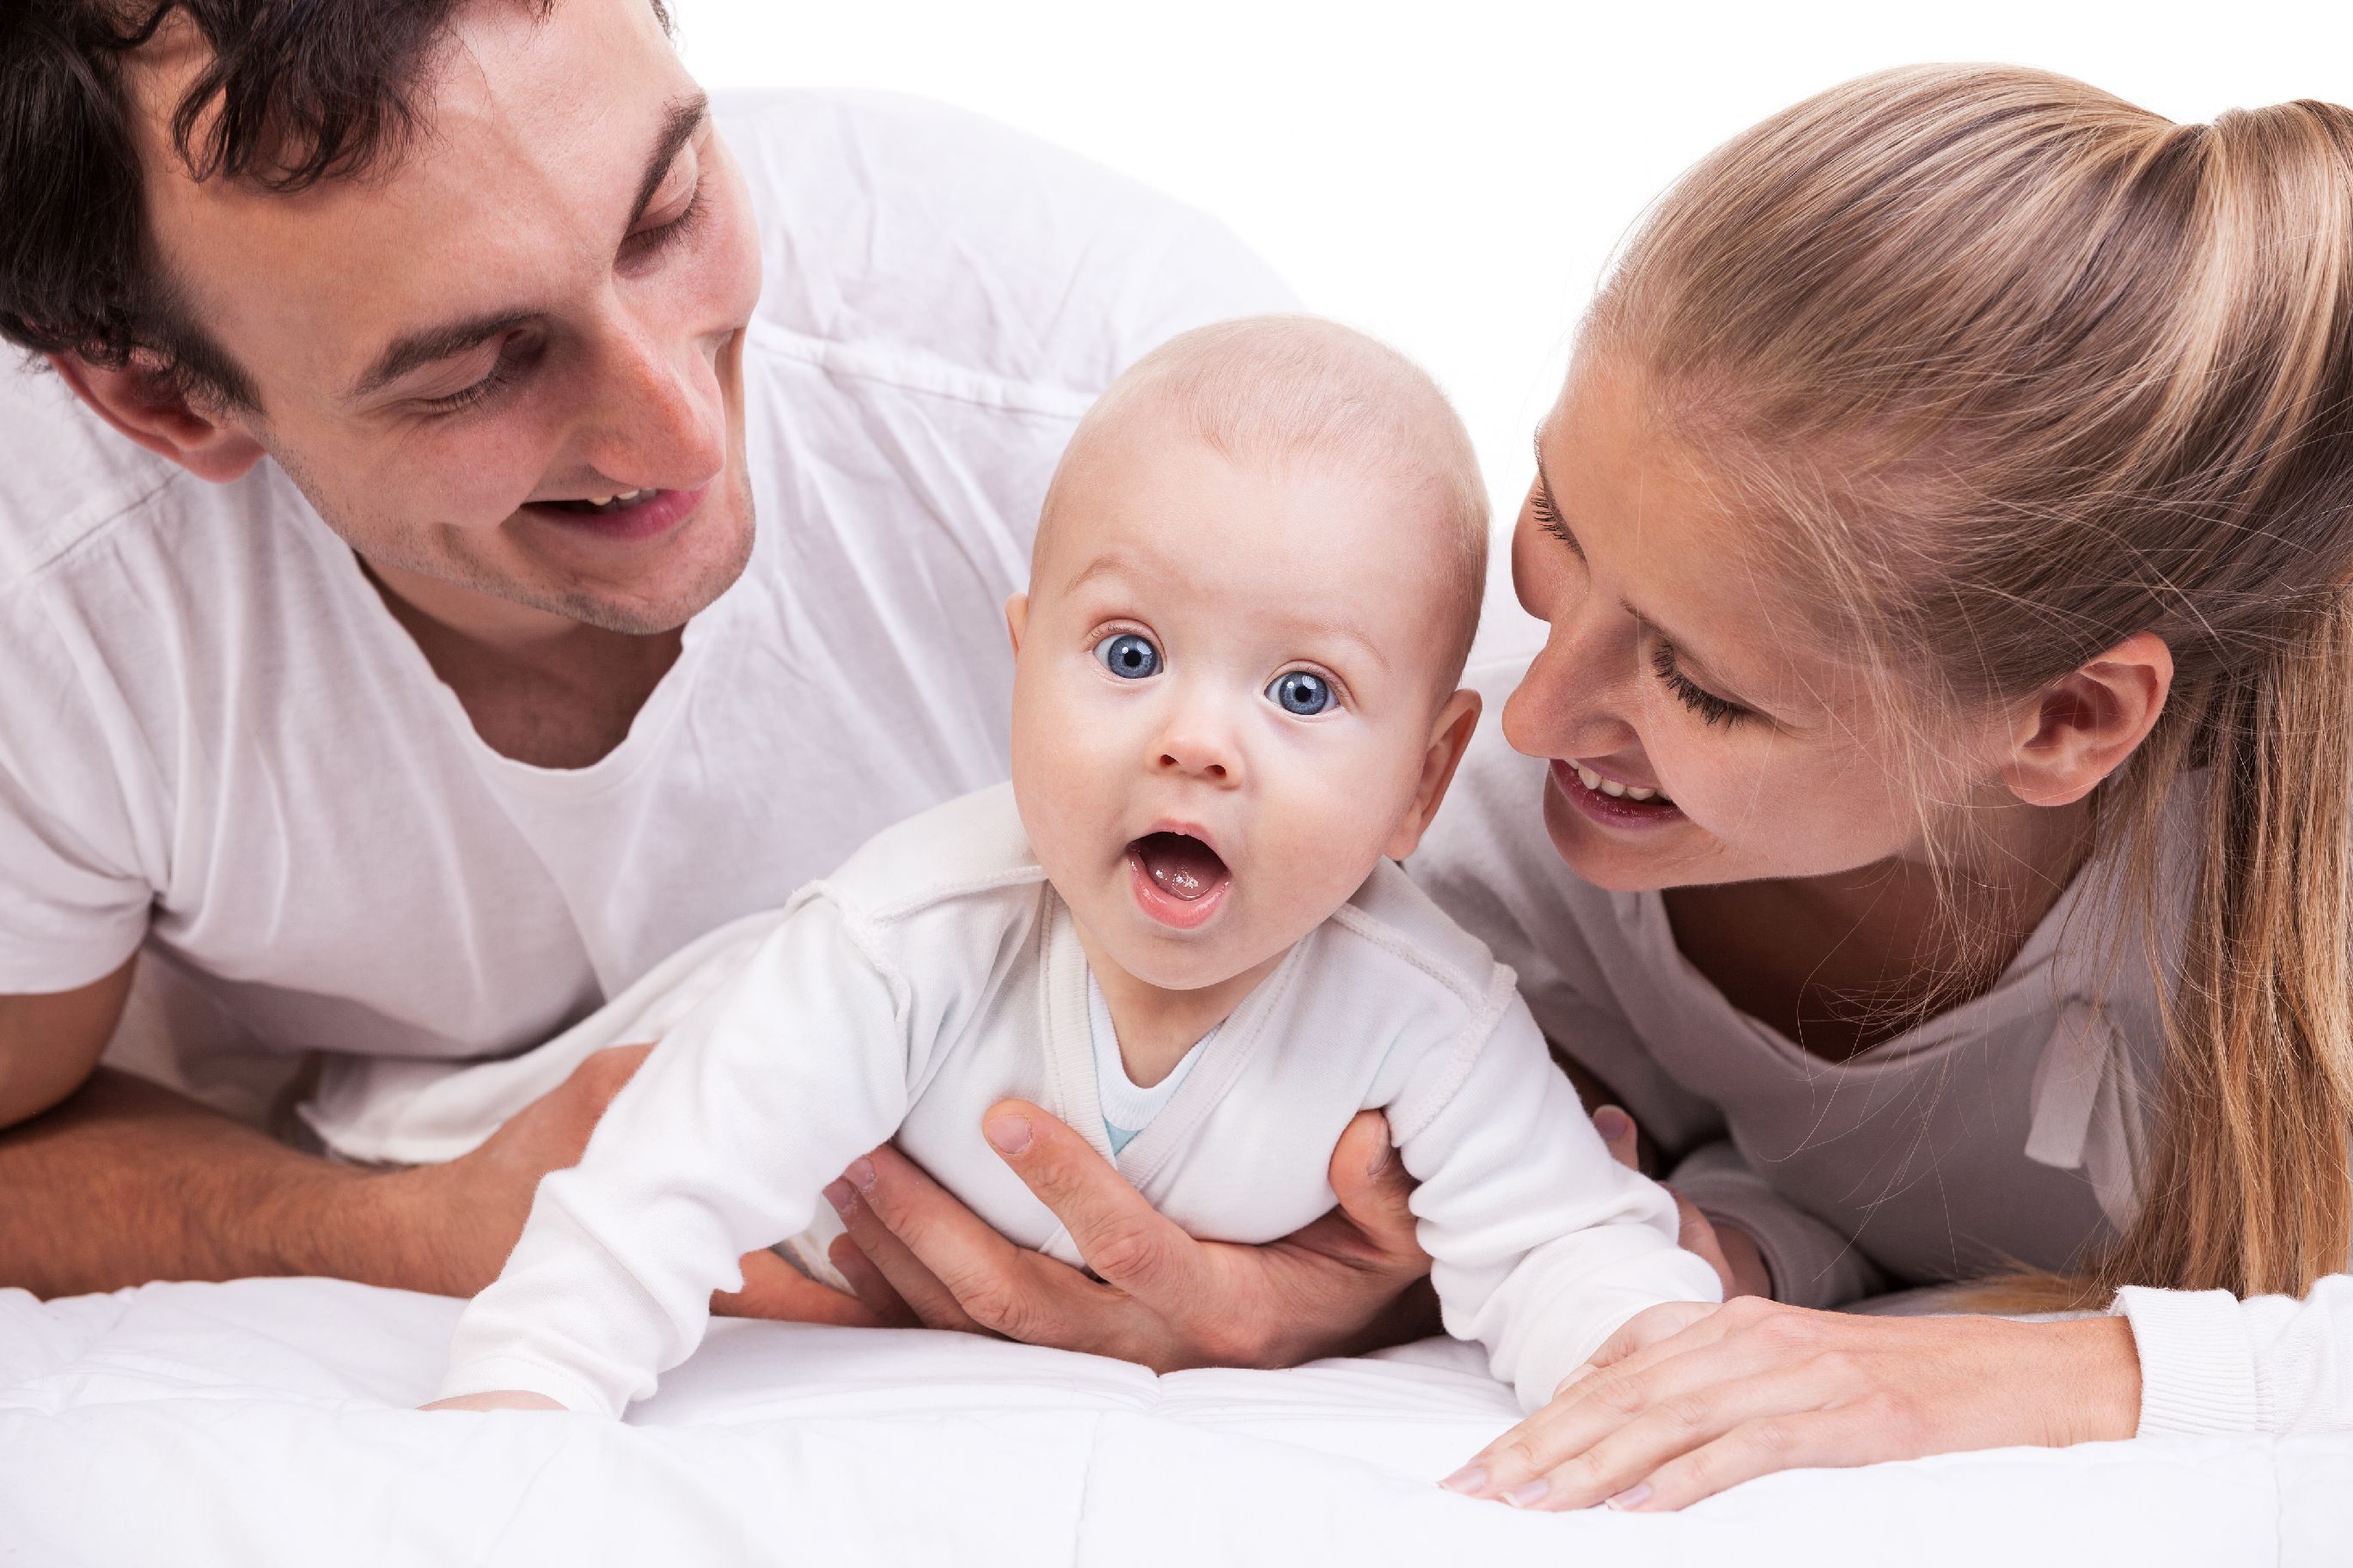 two smiling adults look down at a baby lifting itself up on its arms